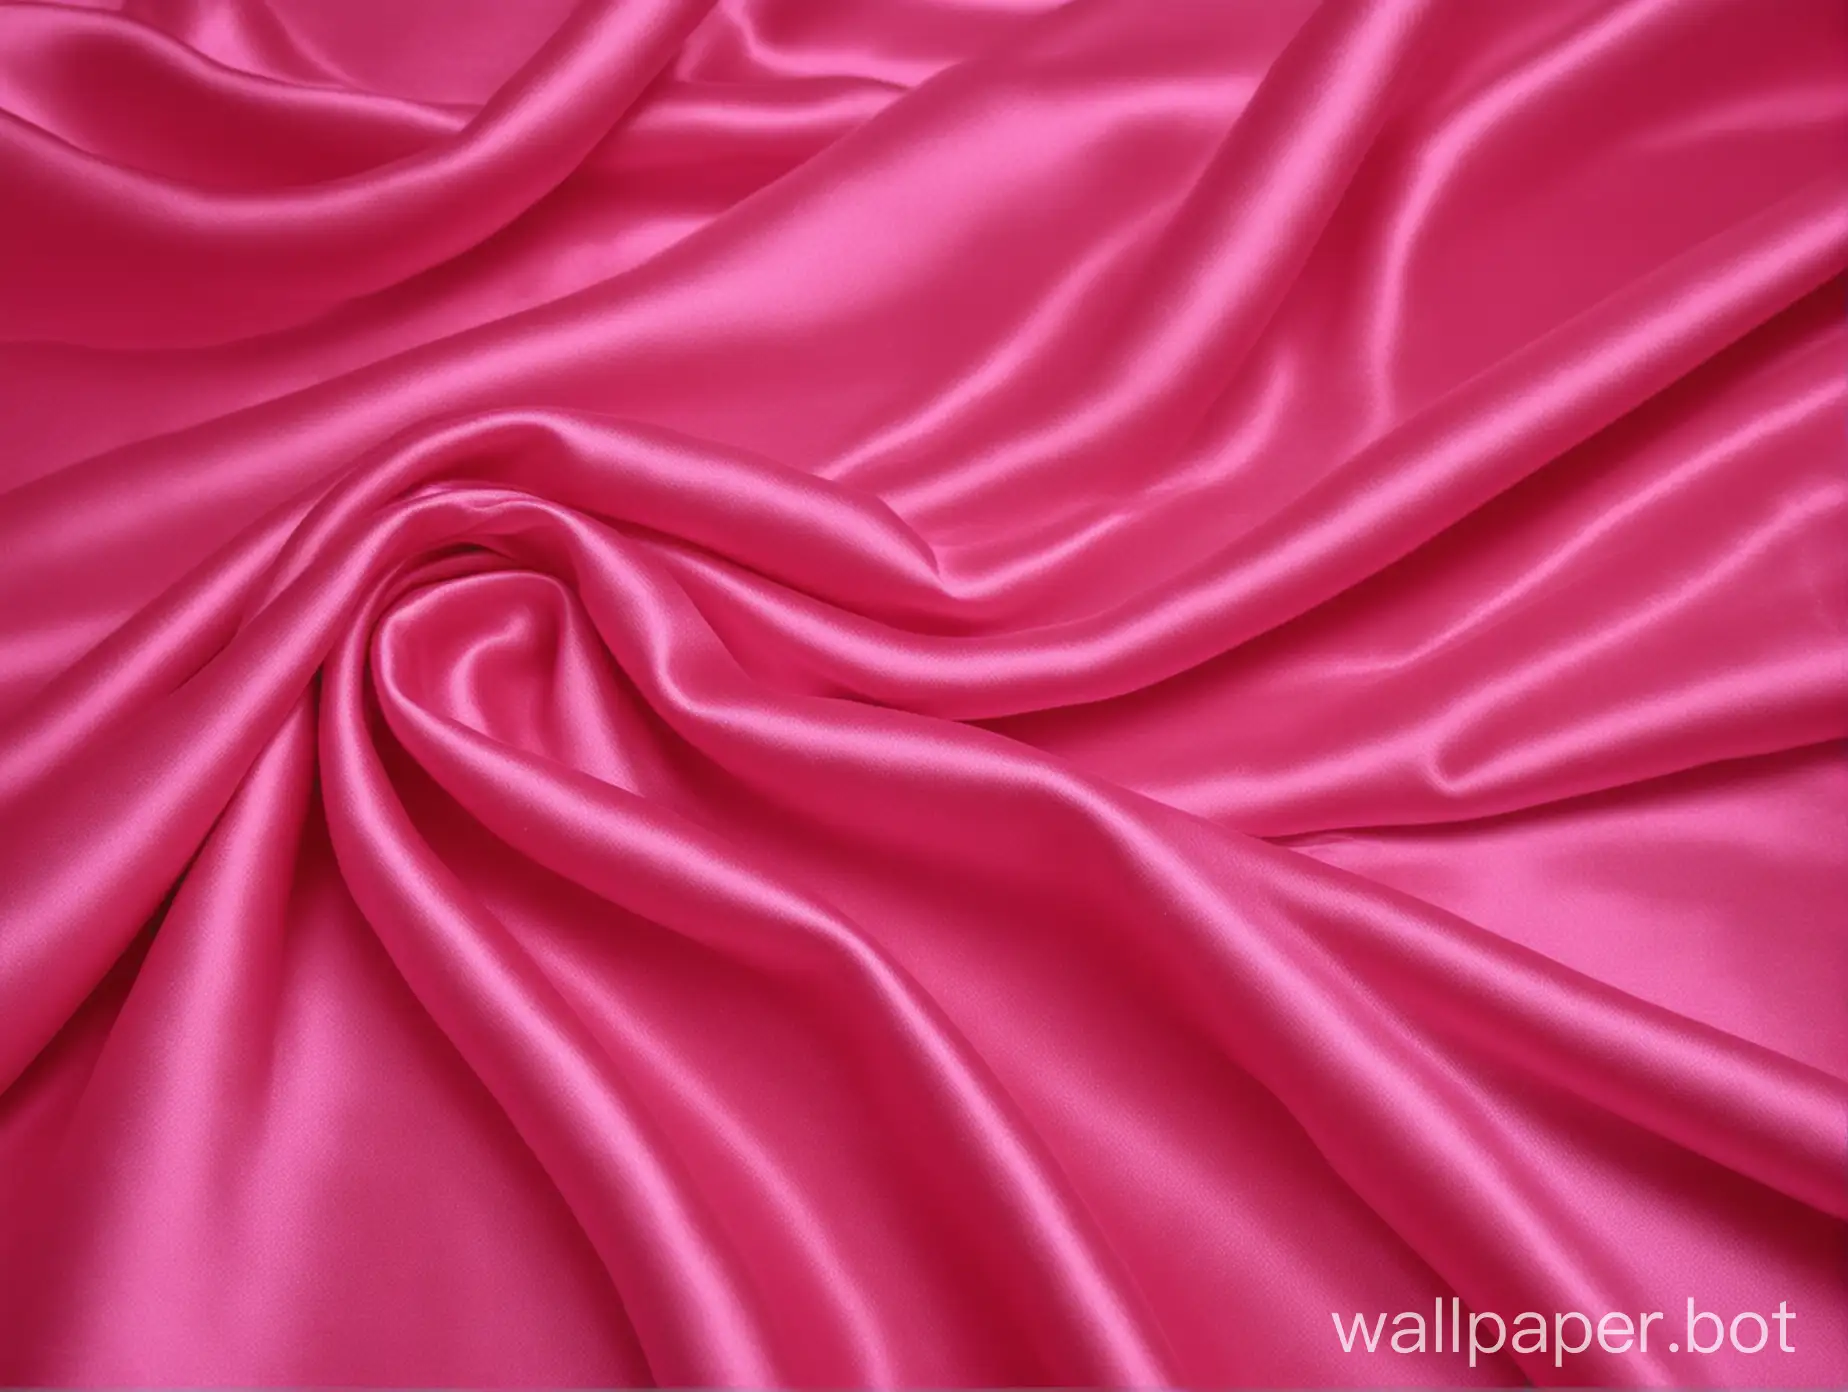 luxurious bed in gentle hot pink fuchsia liquid mulberry silk charmeuse fabric fetish